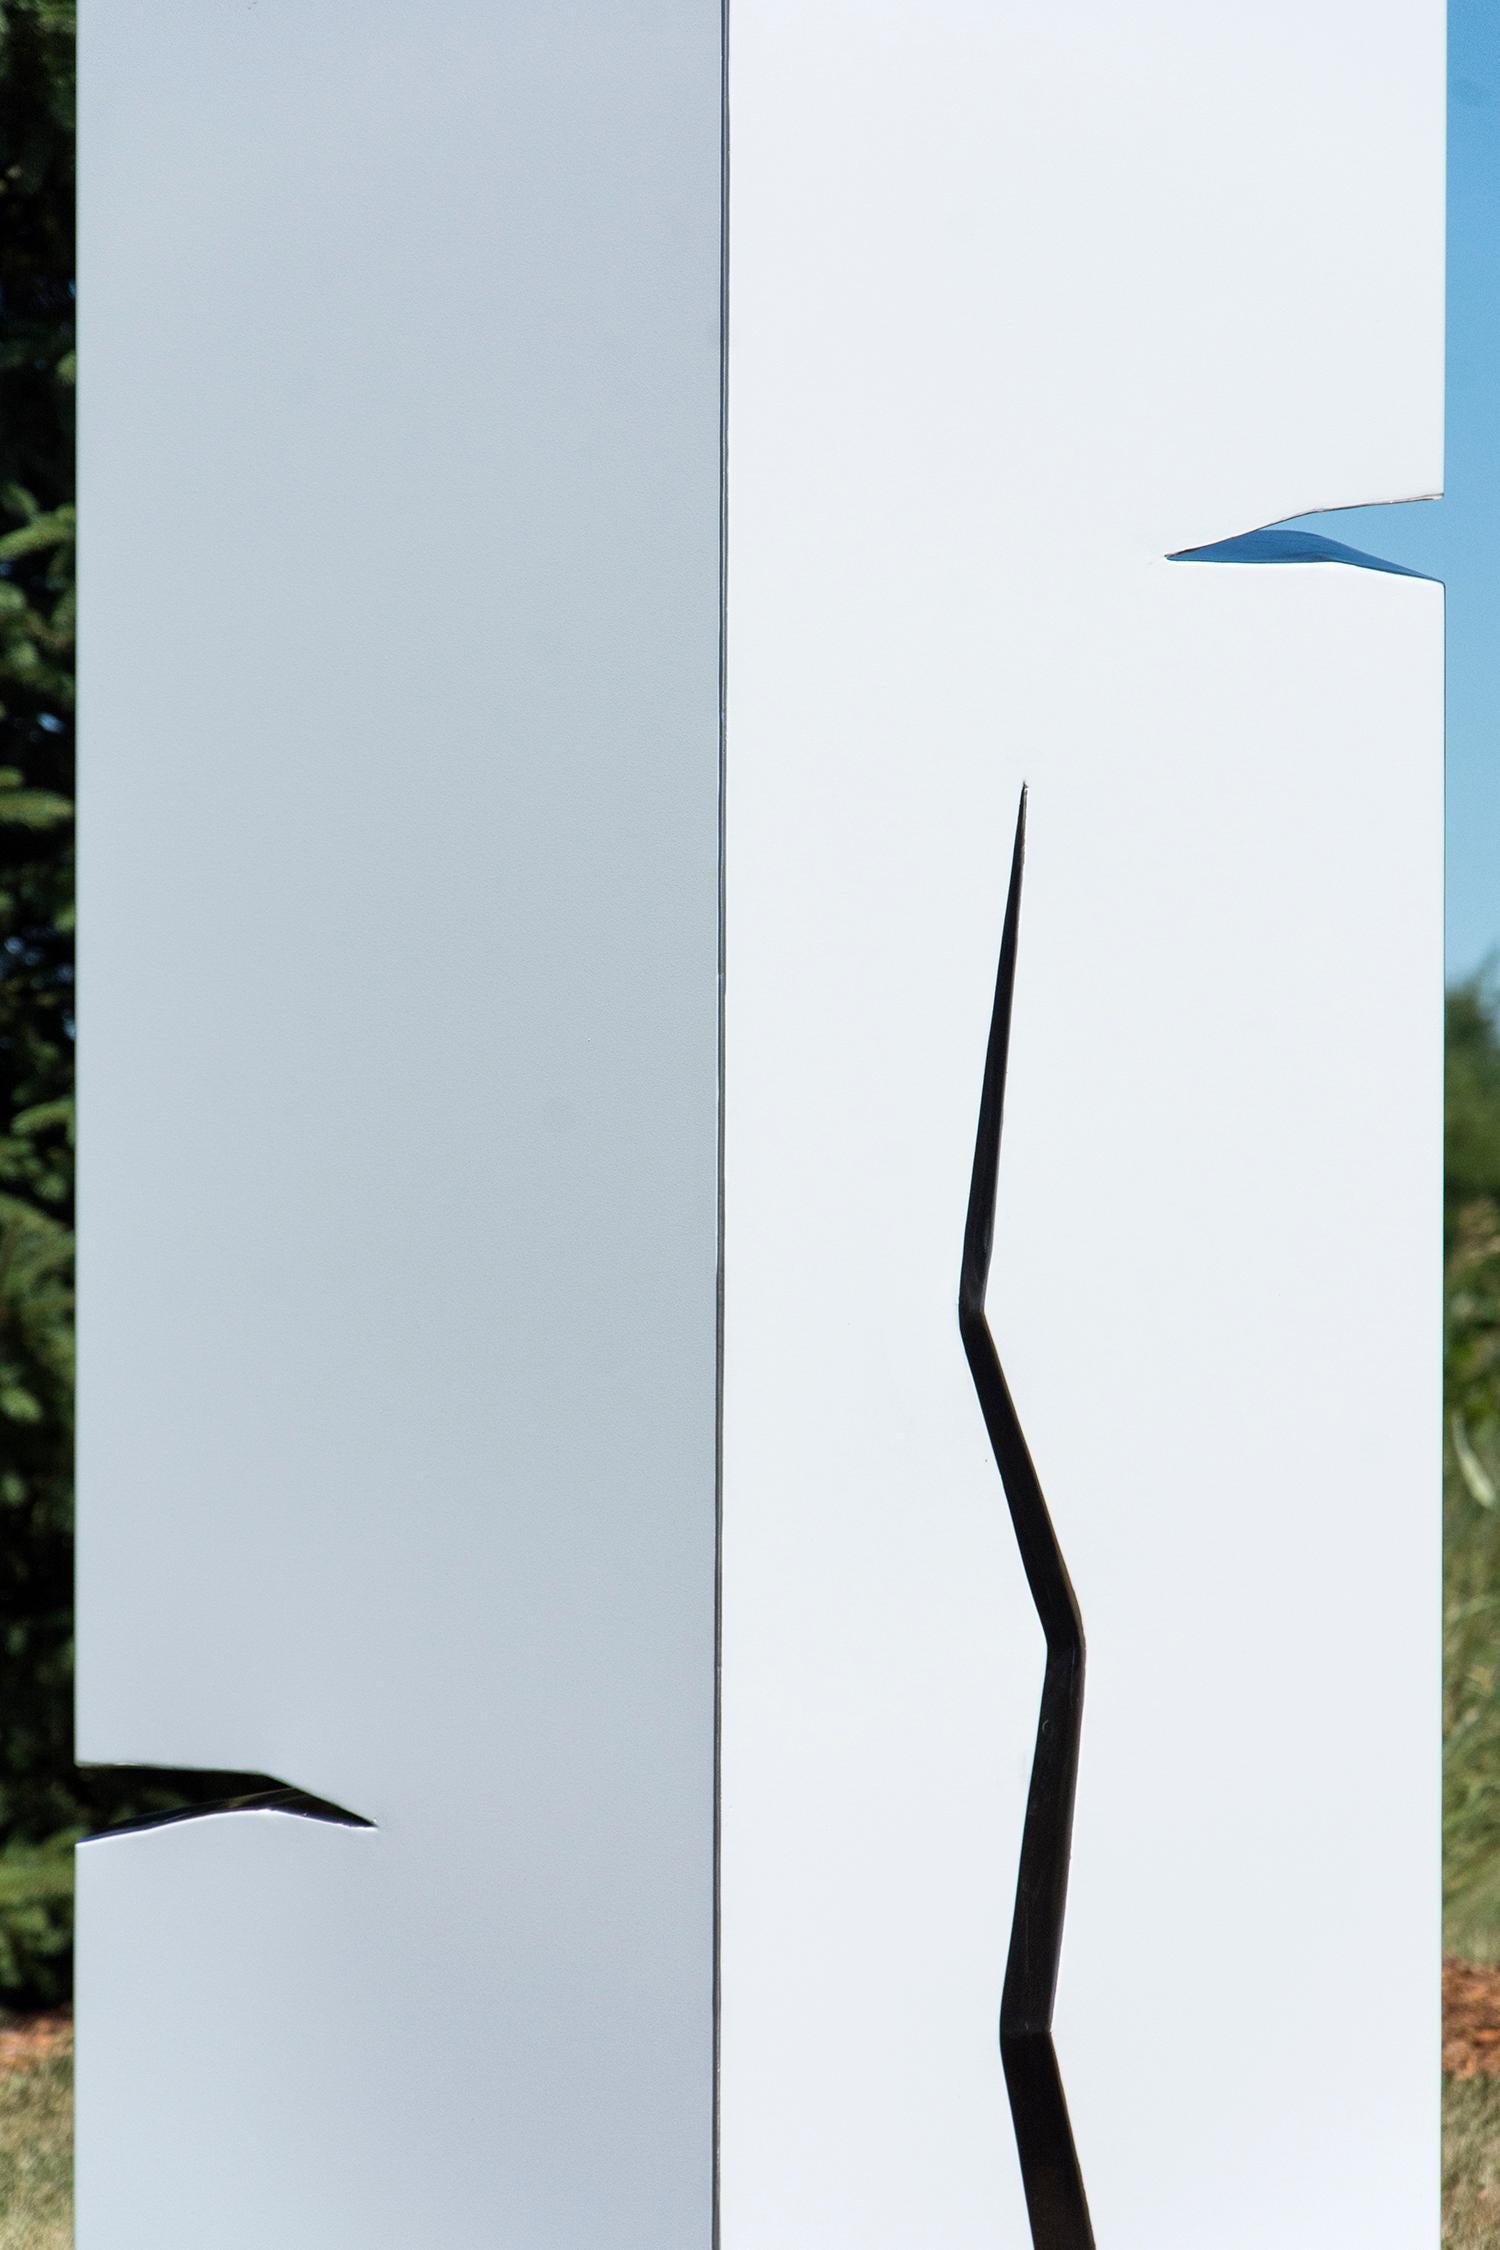 A pillar of stainless steel is coated white in this minimalist outdoor sculpture by Philippe Pallafray. The sculpture is designed with jagged polished cracks in the steel that glint in the sunlight. The artist ascribed meaning to reflected light by